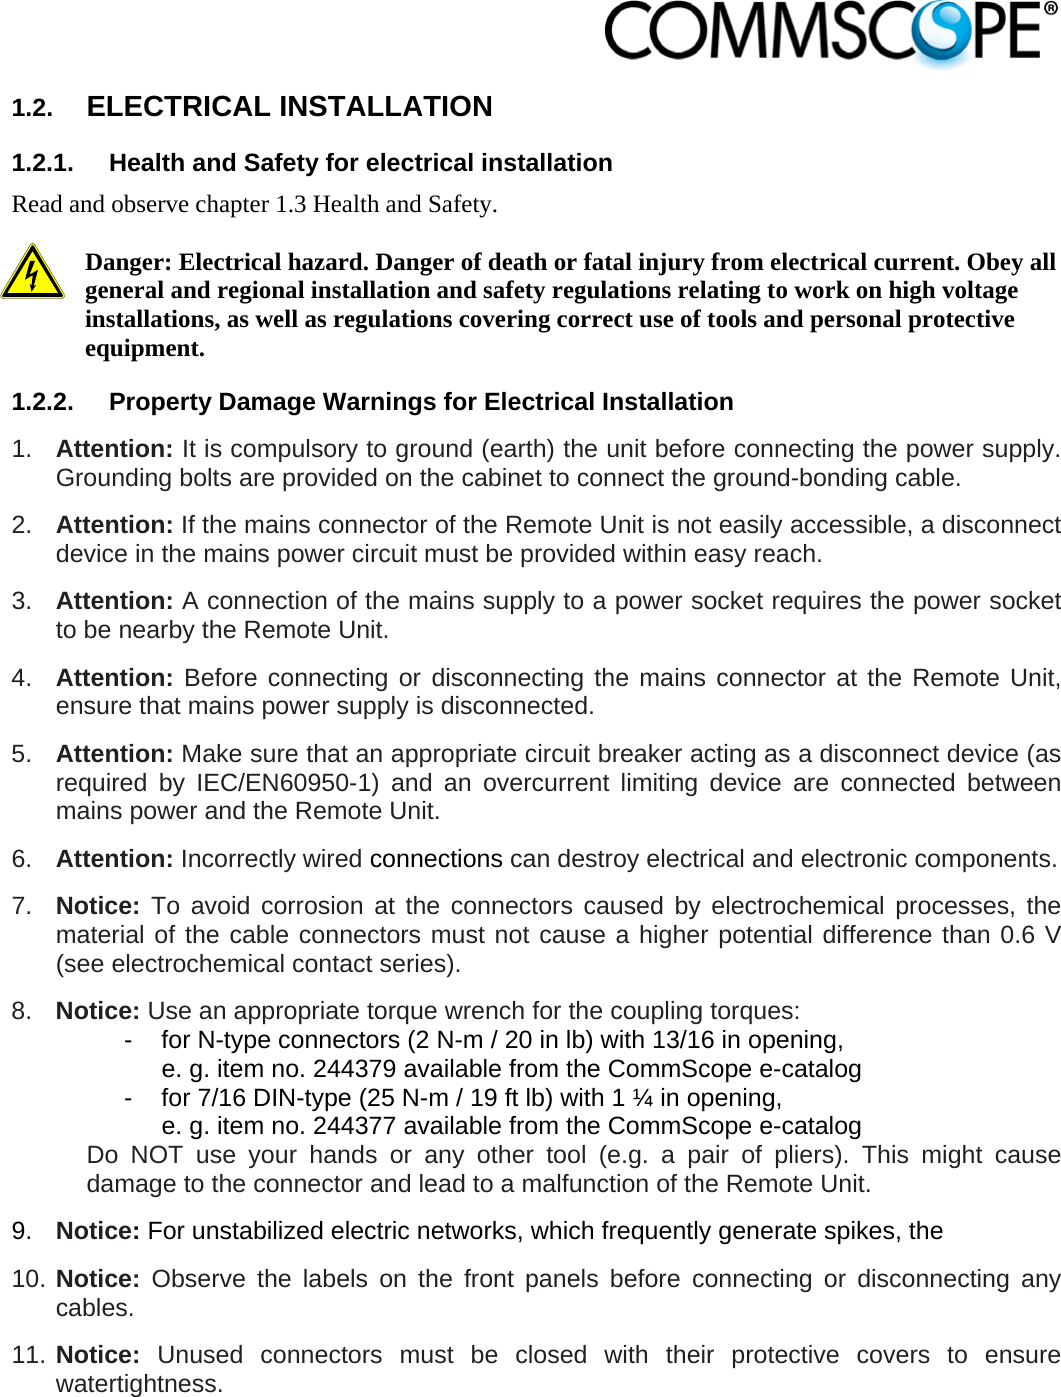                            1.2.  ELECTRICAL INSTALLATION 1.2.1.  Health and Safety for electrical installation Read and observe chapter 1.3 Health and Safety.  Danger: Electrical hazard. Danger of death or fatal injury from electrical current. Obey all general and regional installation and safety regulations relating to work on high voltage installations, as well as regulations covering correct use of tools and personal protective equipment. 1.2.2.  Property Damage Warnings for Electrical Installation 1.  Attention: It is compulsory to ground (earth) the unit before connecting the power supply. Grounding bolts are provided on the cabinet to connect the ground-bonding cable.  2.  Attention: If the mains connector of the Remote Unit is not easily accessible, a disconnect device in the mains power circuit must be provided within easy reach. 3.  Attention: A connection of the mains supply to a power socket requires the power socket to be nearby the Remote Unit. 4.  Attention: Before connecting or disconnecting the mains connector at the Remote Unit, ensure that mains power supply is disconnected. 5.  Attention: Make sure that an appropriate circuit breaker acting as a disconnect device (as required by IEC/EN60950-1) and an overcurrent limiting device are connected between mains power and the Remote Unit. 6.  Attention: Incorrectly wired connections can destroy electrical and electronic components.  7.  Notice: To avoid corrosion at the connectors caused by electrochemical processes, the material of the cable connectors must not cause a higher potential difference than 0.6 V (see electrochemical contact series). 8.  Notice: Use an appropriate torque wrench for the coupling torques:   -  for N-type connectors (2 N-m / 20 in lb) with 13/16 in opening,      e. g. item no. 244379 available from the CommScope e-catalog   -  for 7/16 DIN-type (25 N-m / 19 ft lb) with 1 ¼ in opening,      e. g. item no. 244377 available from the CommScope e-catalog Do NOT use your hands or any other tool (e.g. a pair of pliers). This might cause damage to the connector and lead to a malfunction of the Remote Unit. 9.  Notice: For unstabilized electric networks, which frequently generate spikes, the  10. Notice: Observe the labels on the front panels before connecting or disconnecting any cables. 11. Notice: Unused connectors must be closed with their protective covers to ensure watertightness. 